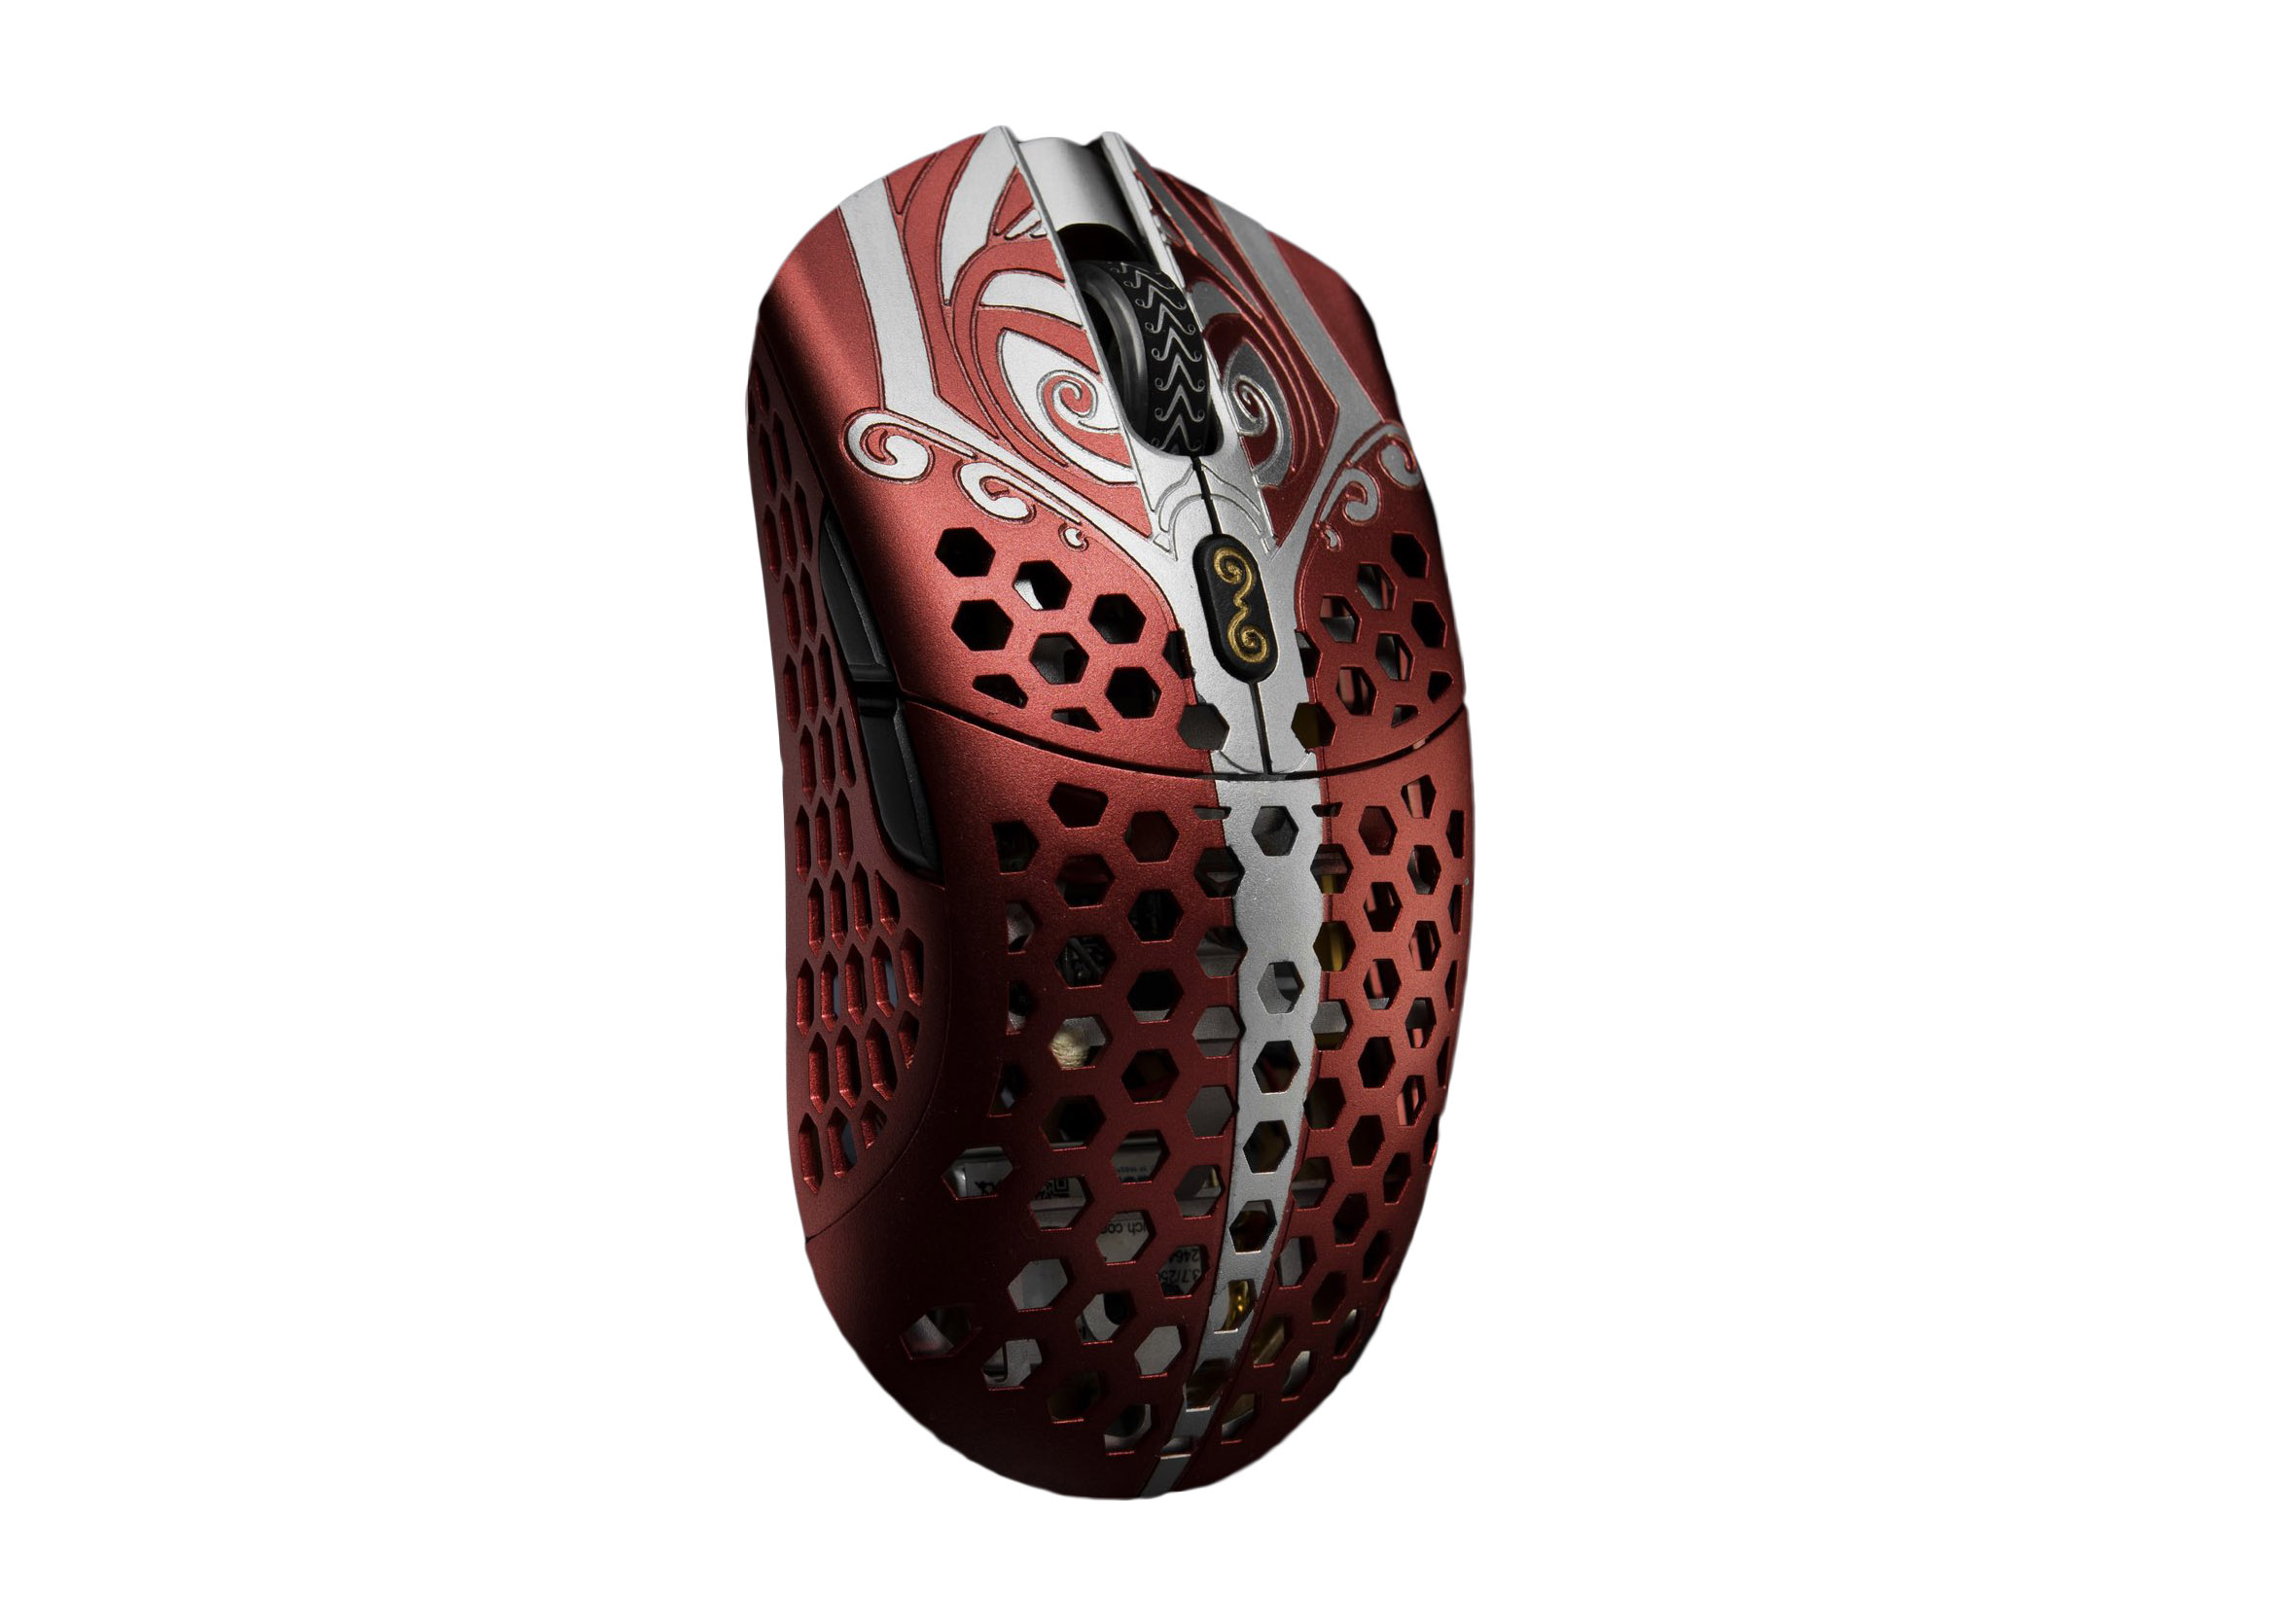 PC/タブレット PC周辺機器 Finalmouse Starlight-12 Wireless Mouse Small Ares God of War - US